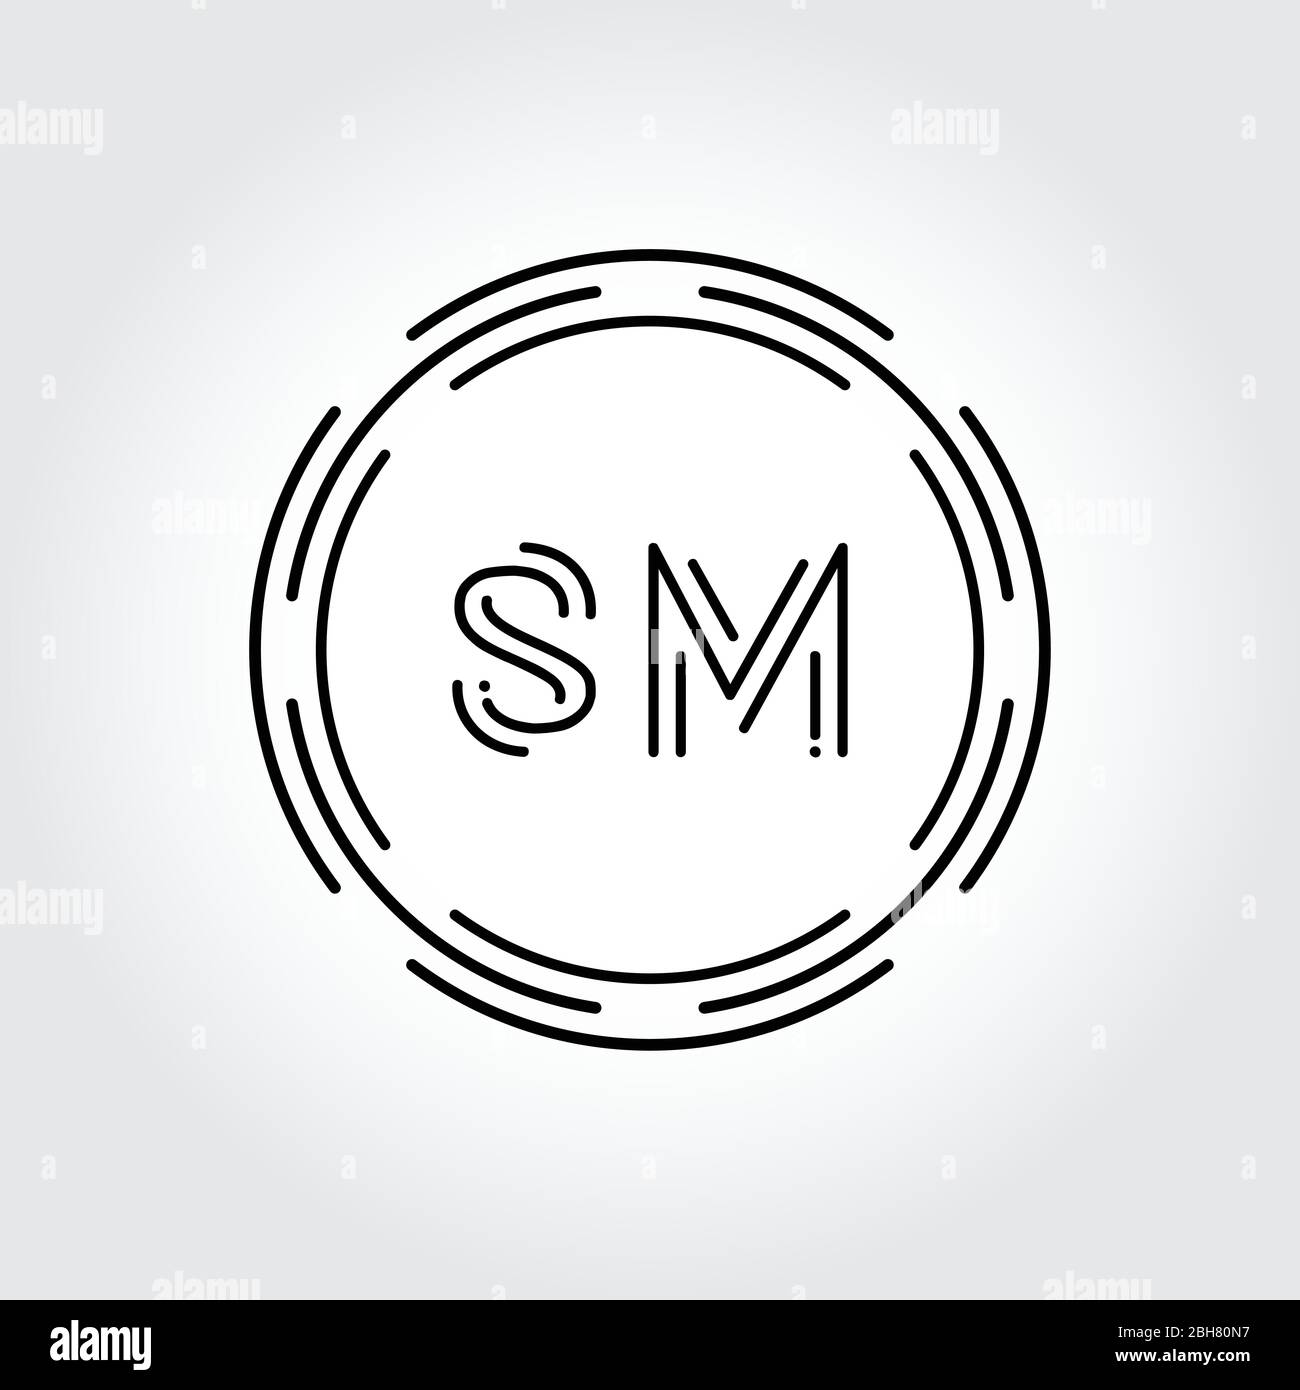 Sm Logo High Resolution Stock Photography and Images - Alamy